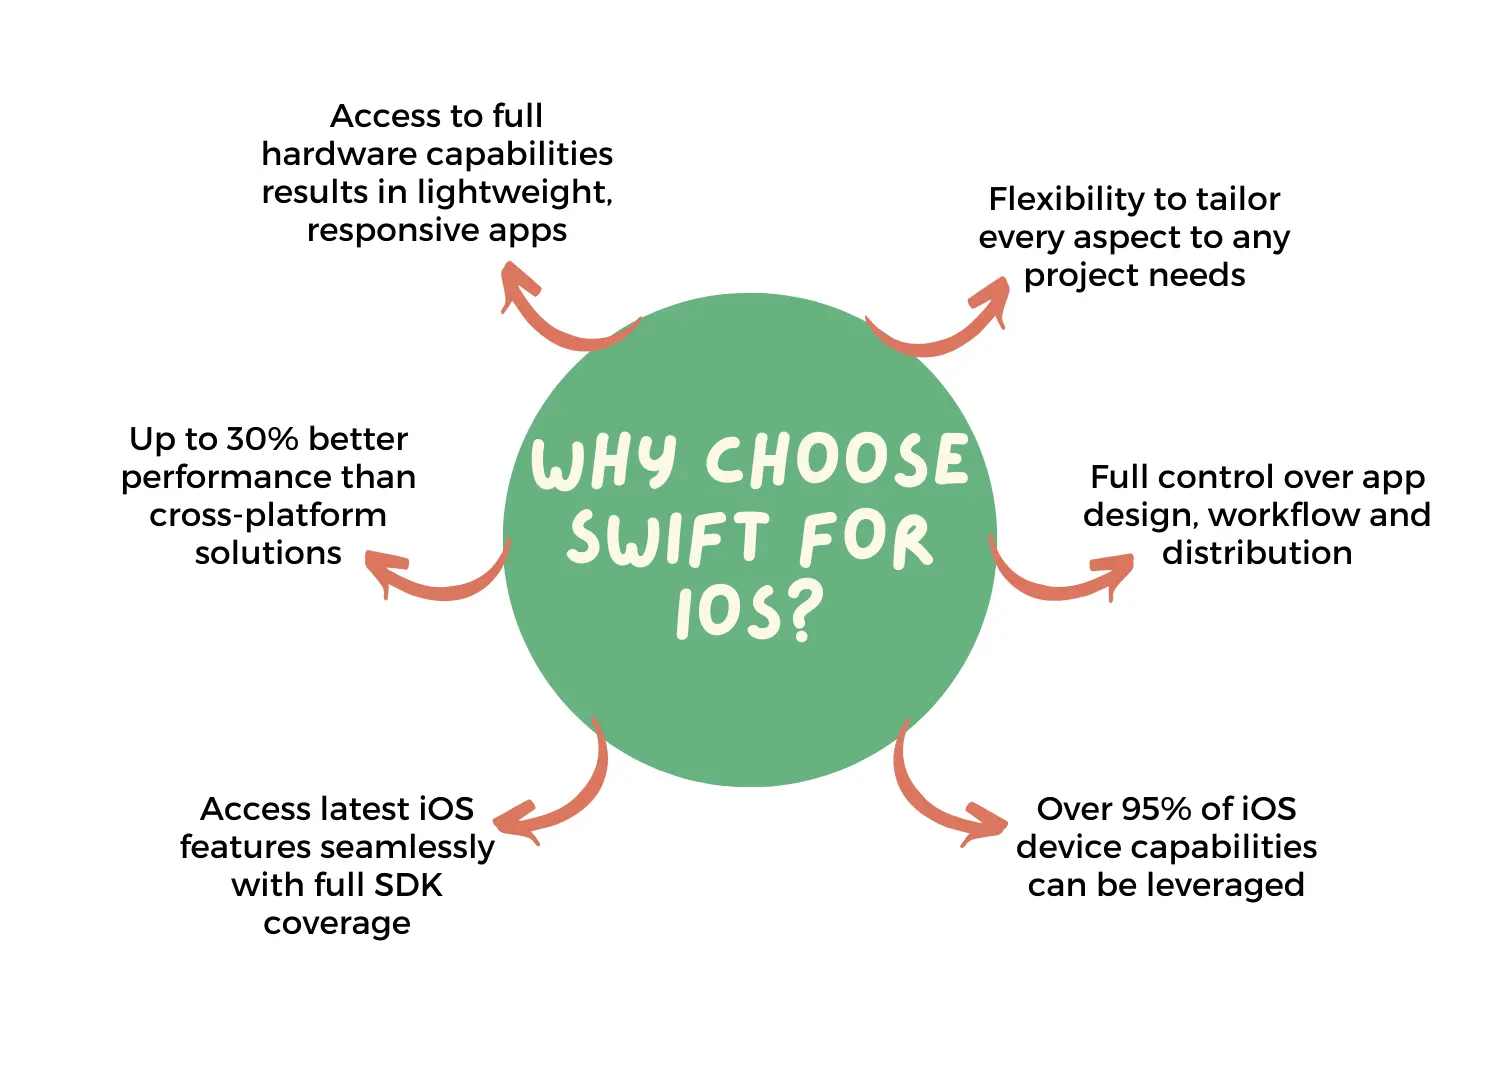 Why Choose Swift for iOS